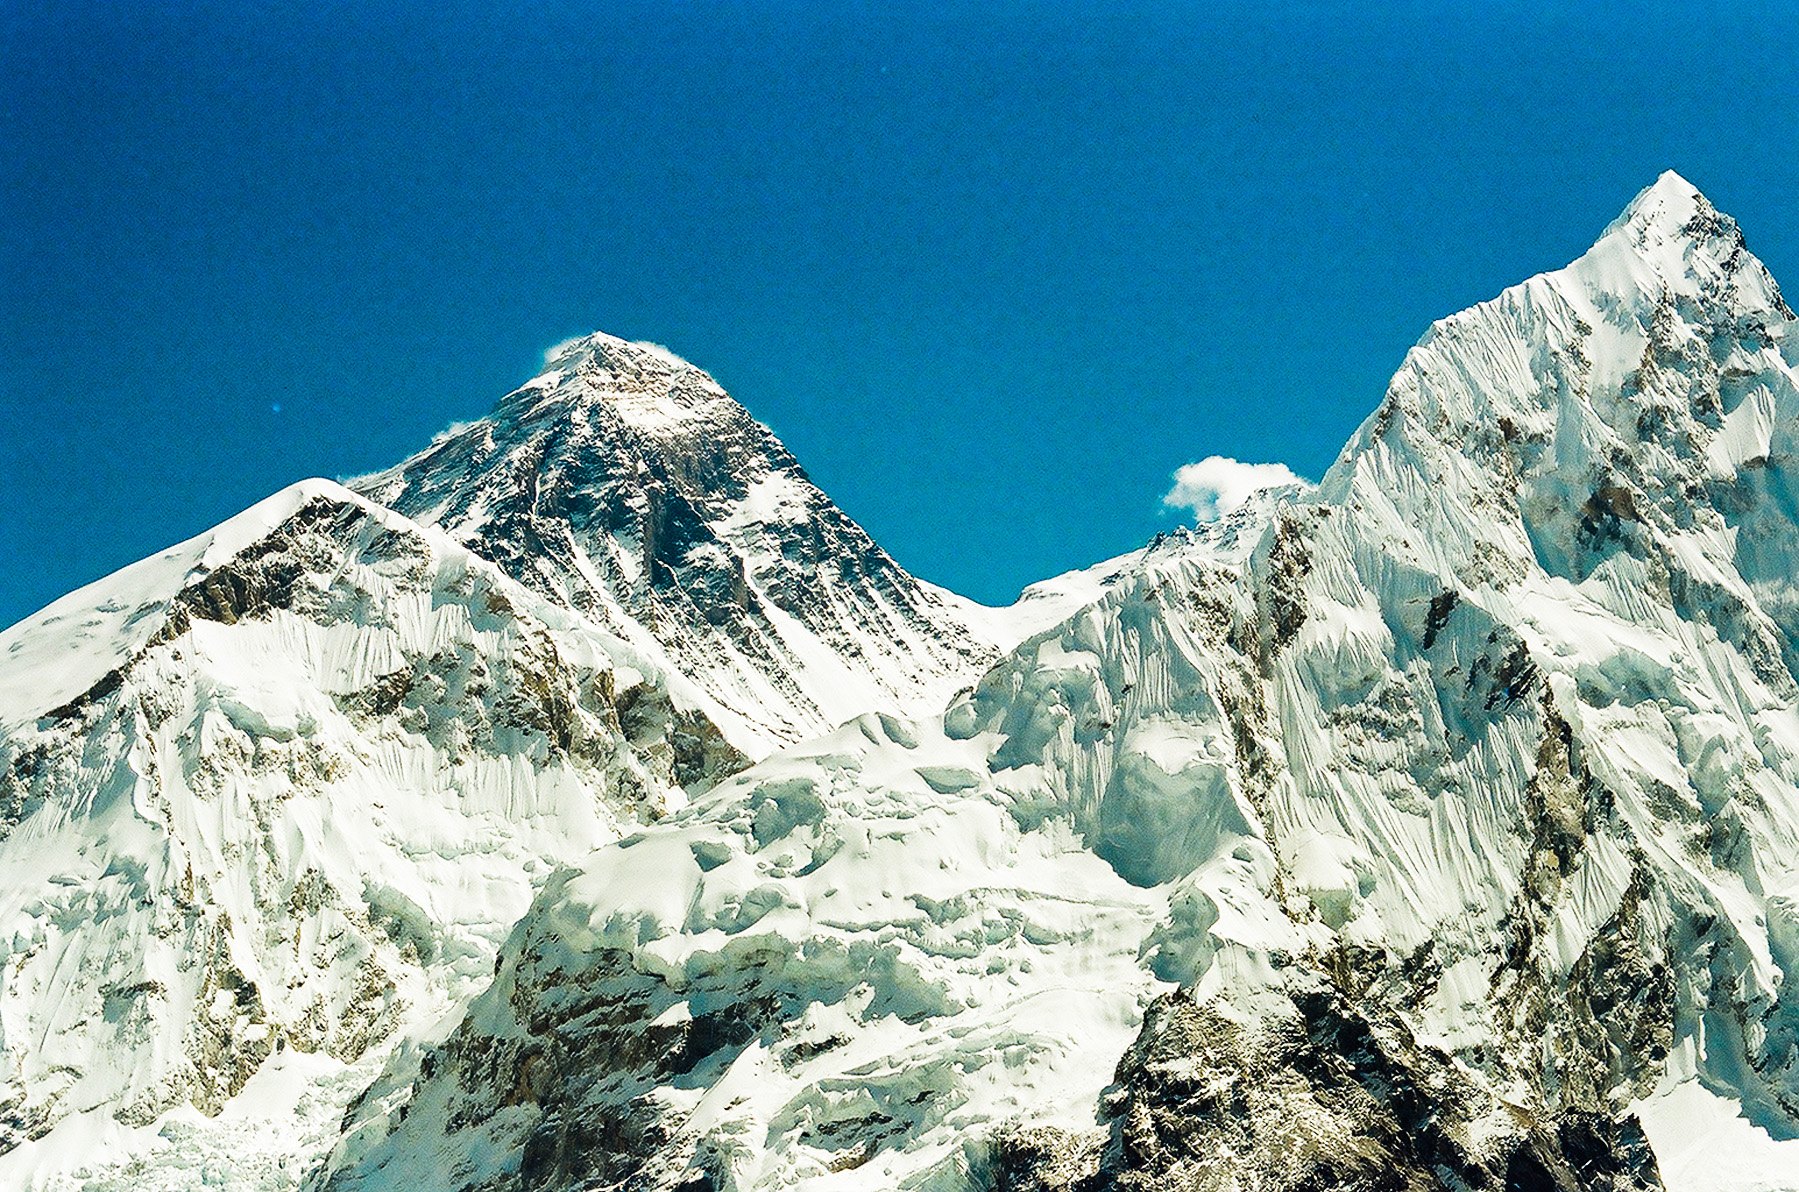 Trekking to Everest Base Camp: A Journey of a Lifetime